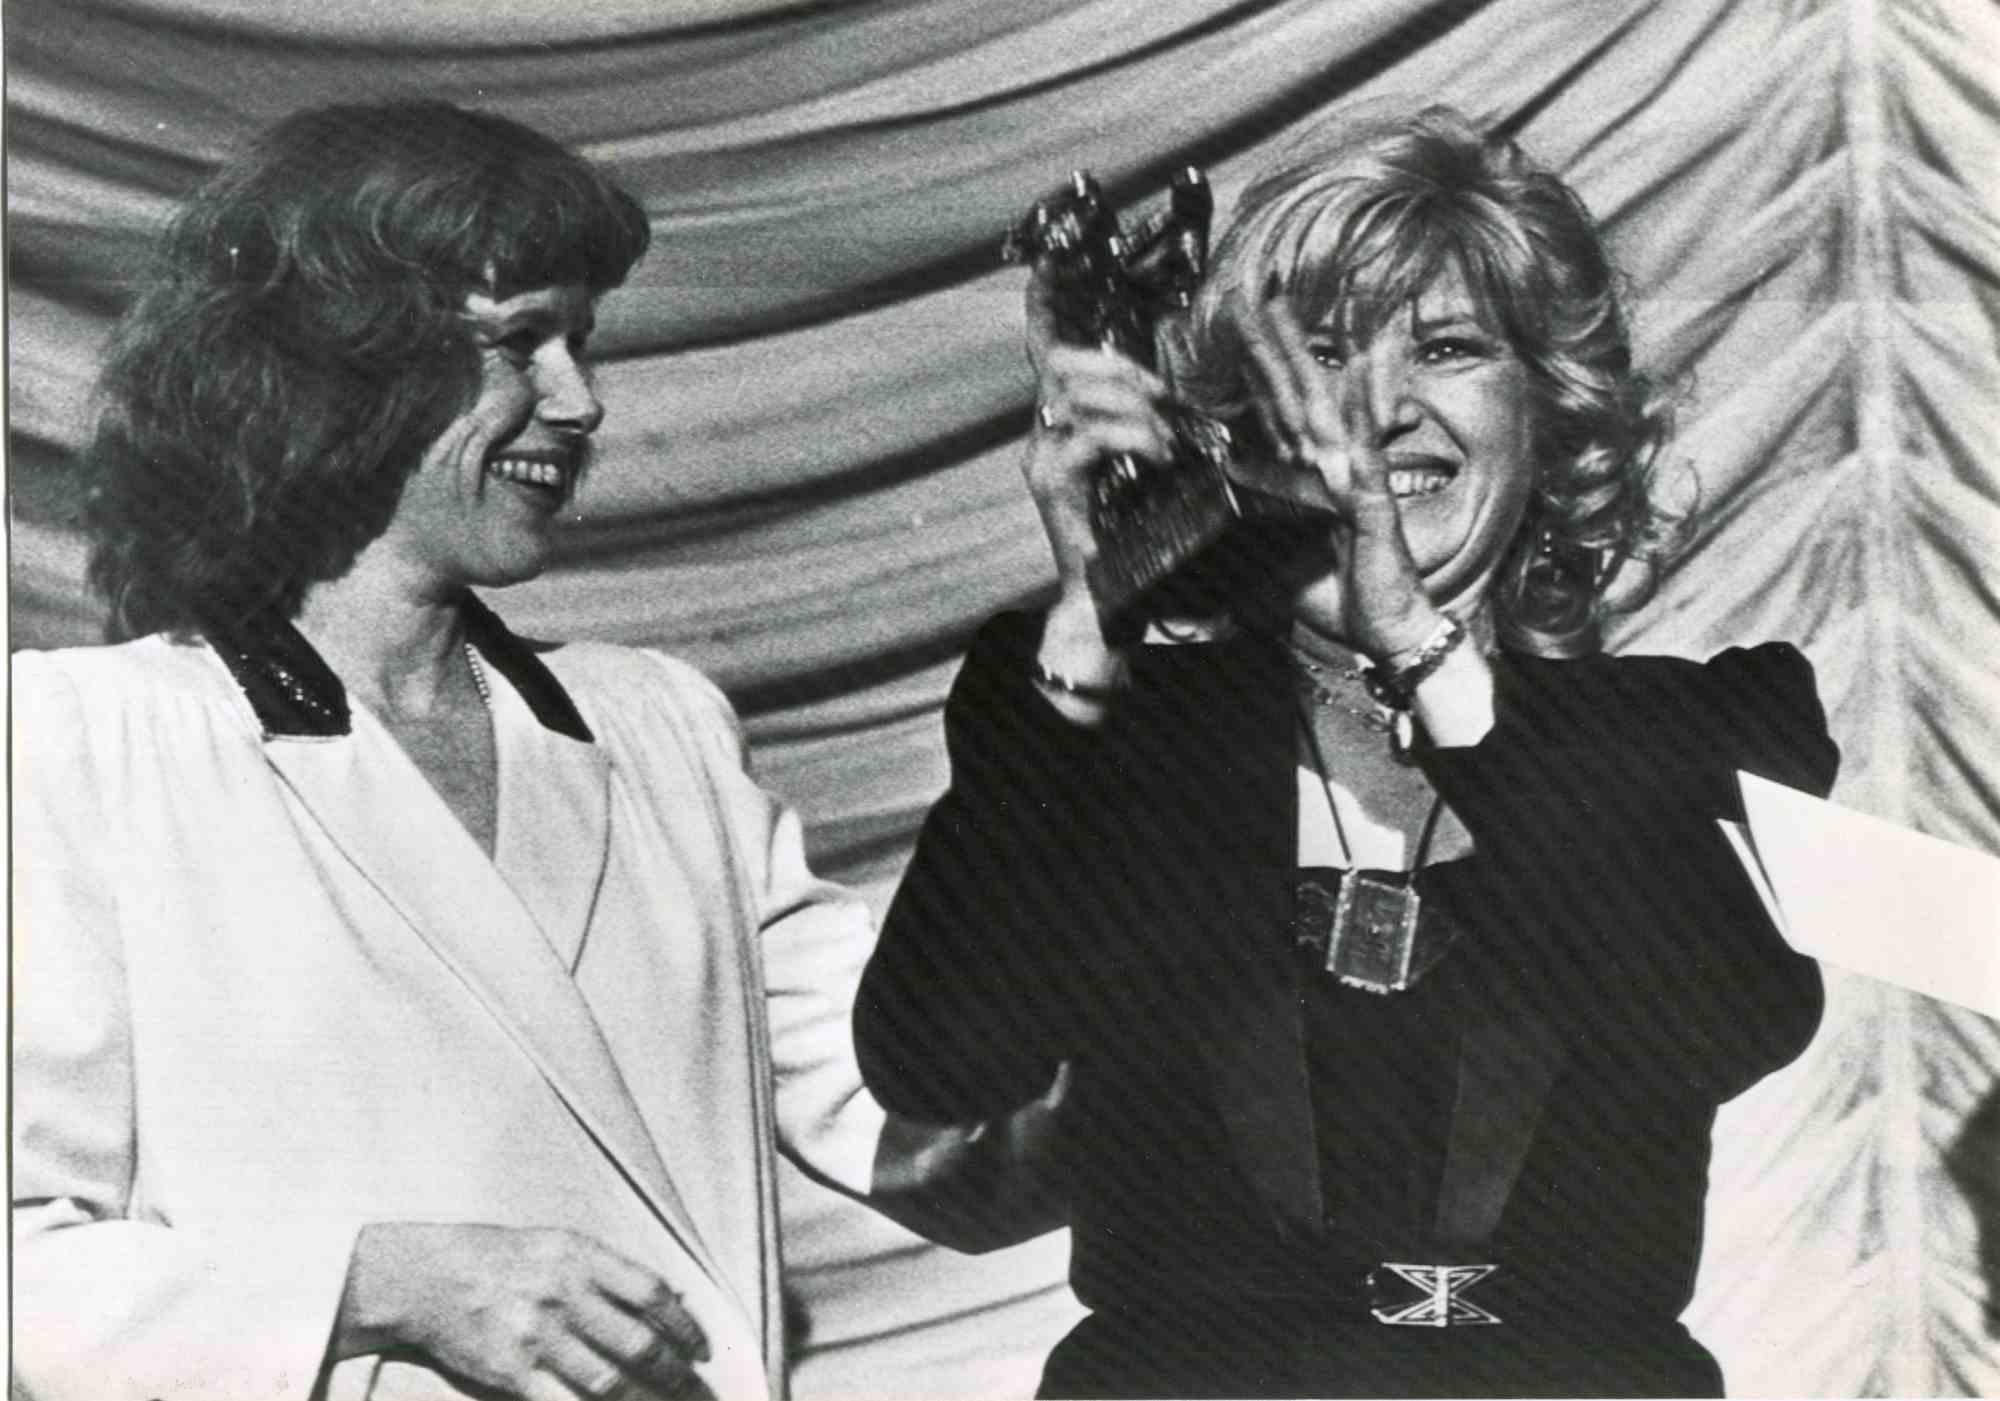 Unknown Black and White Photograph - Monica Vitti and Liv Ullman - Vintage Black and White Photo - 1980s